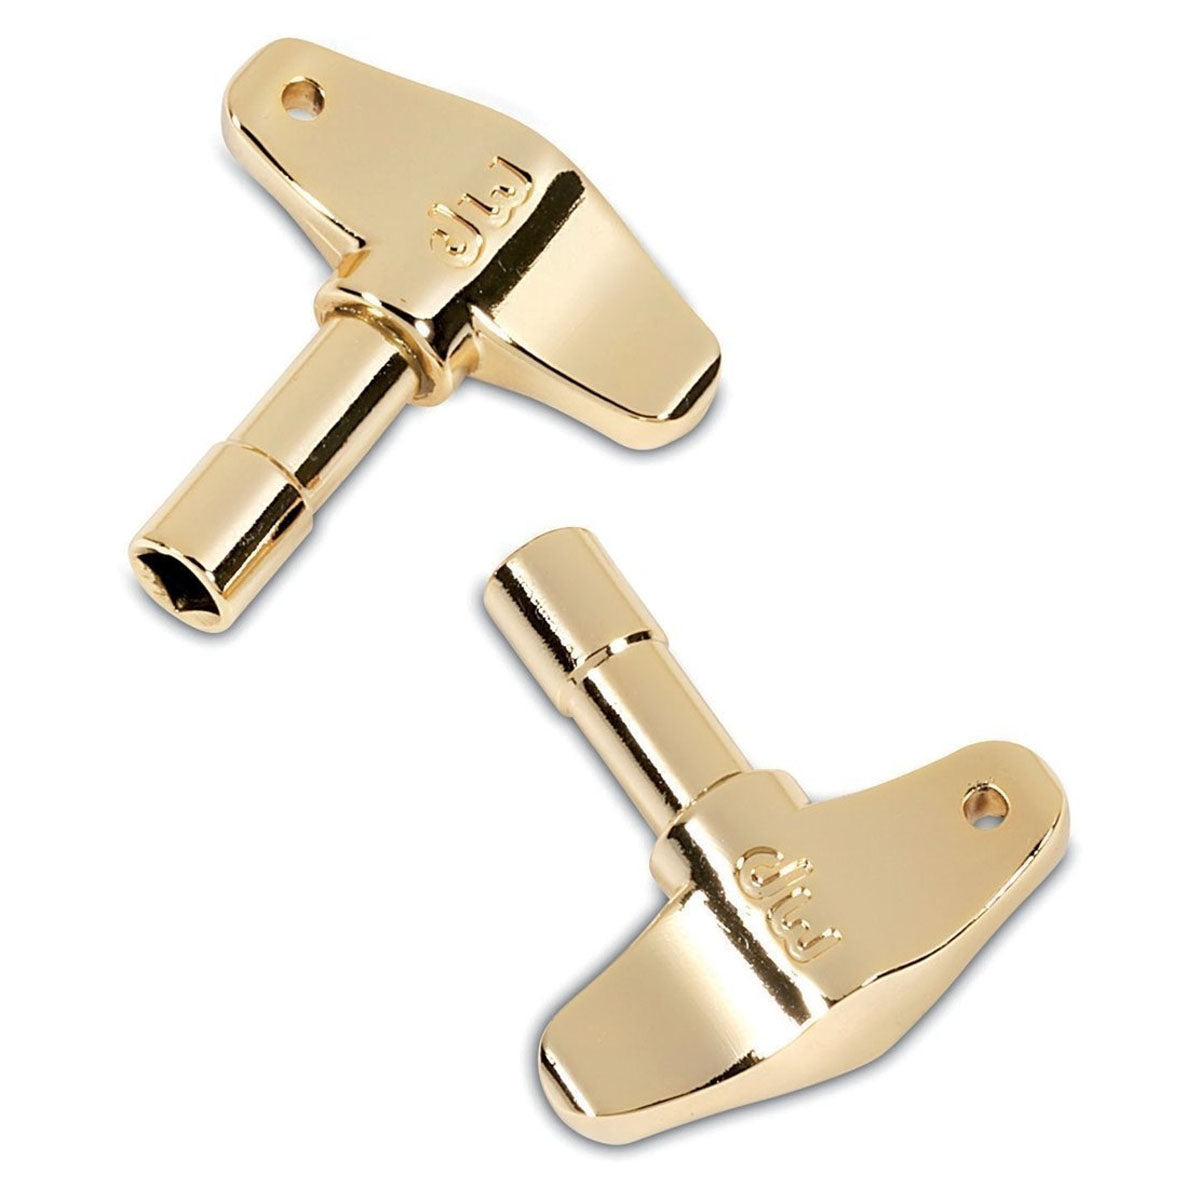 DW SM801-2GD Standard Drum Key Plated in Gold (Pack of 2) - Clamshell